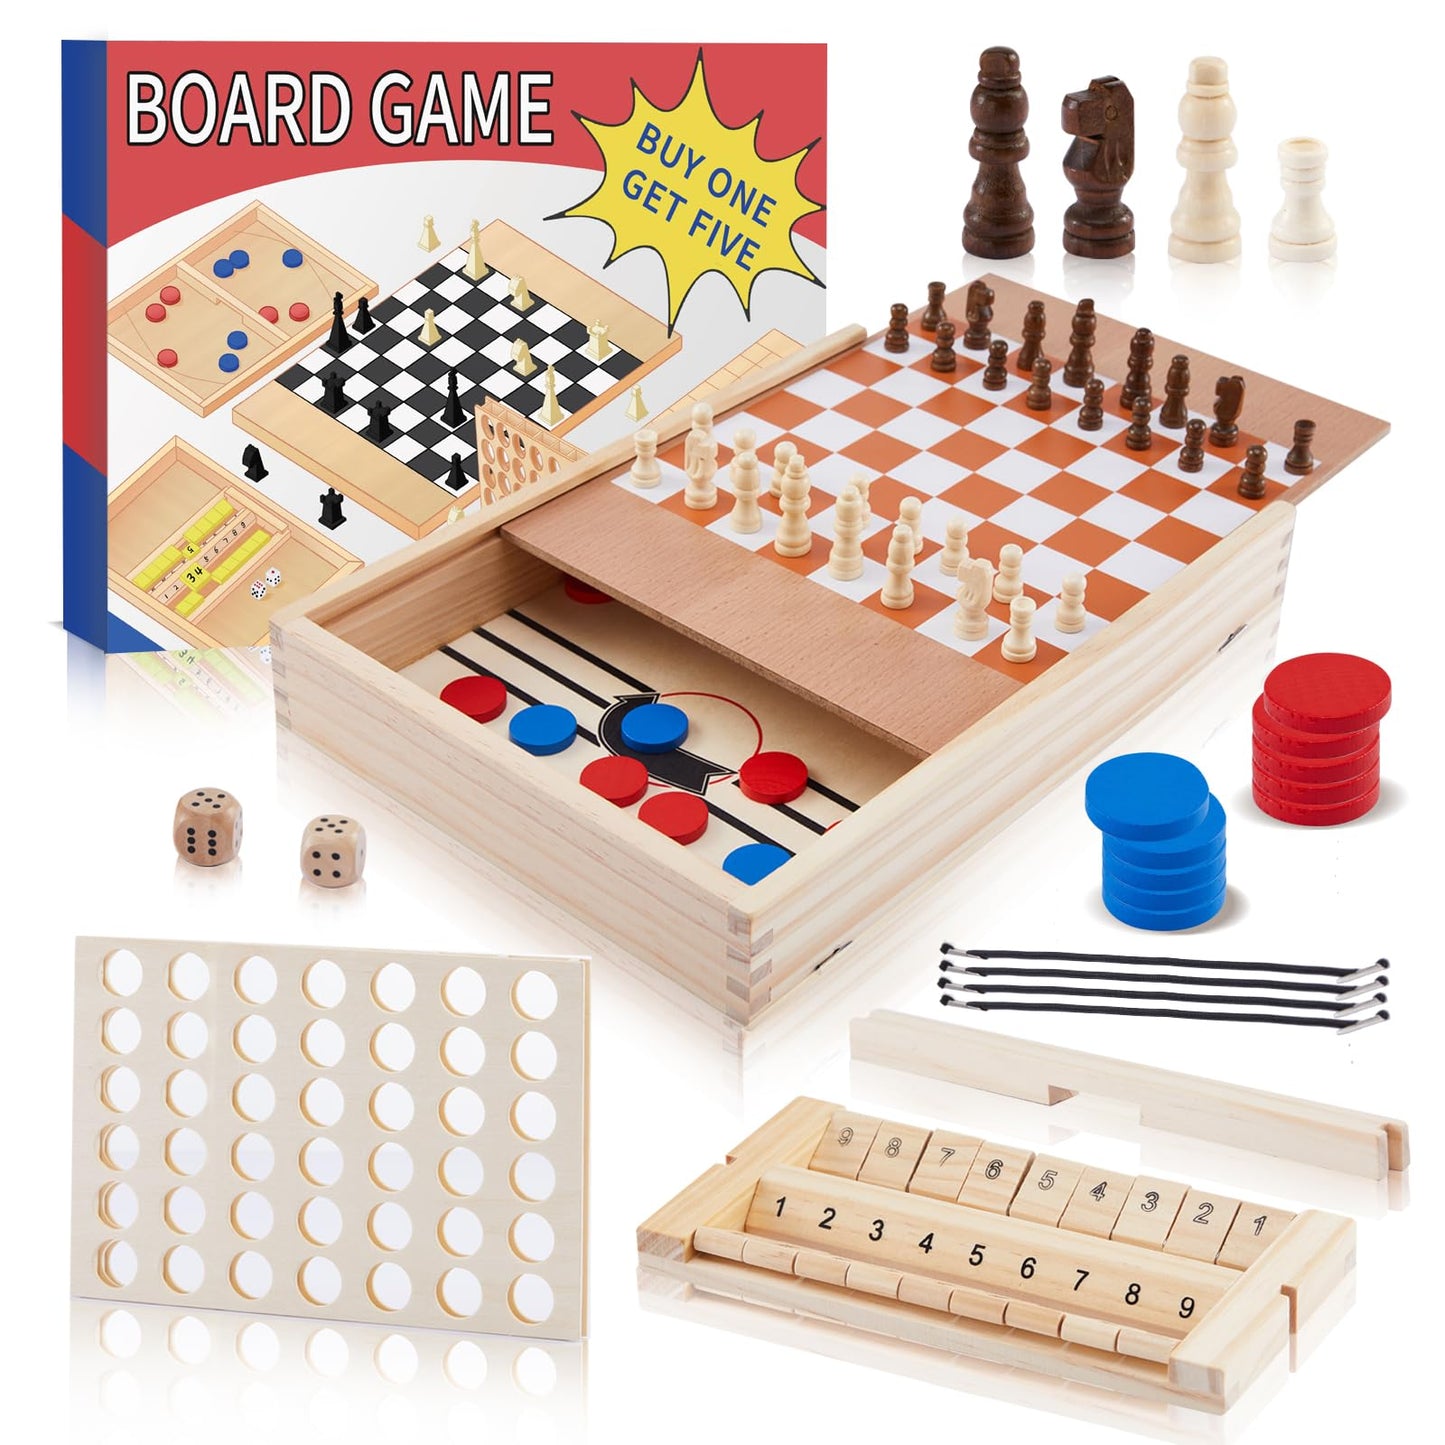 Kaas 5-in-1 Wooden Chess and Checkers Game Set for Kids and Adults, Chess, Checkers, Sling Puck Game, Shut The Box Game, Four-in-a-Row Game, Portable Travel Chess Board Sets Gift Package